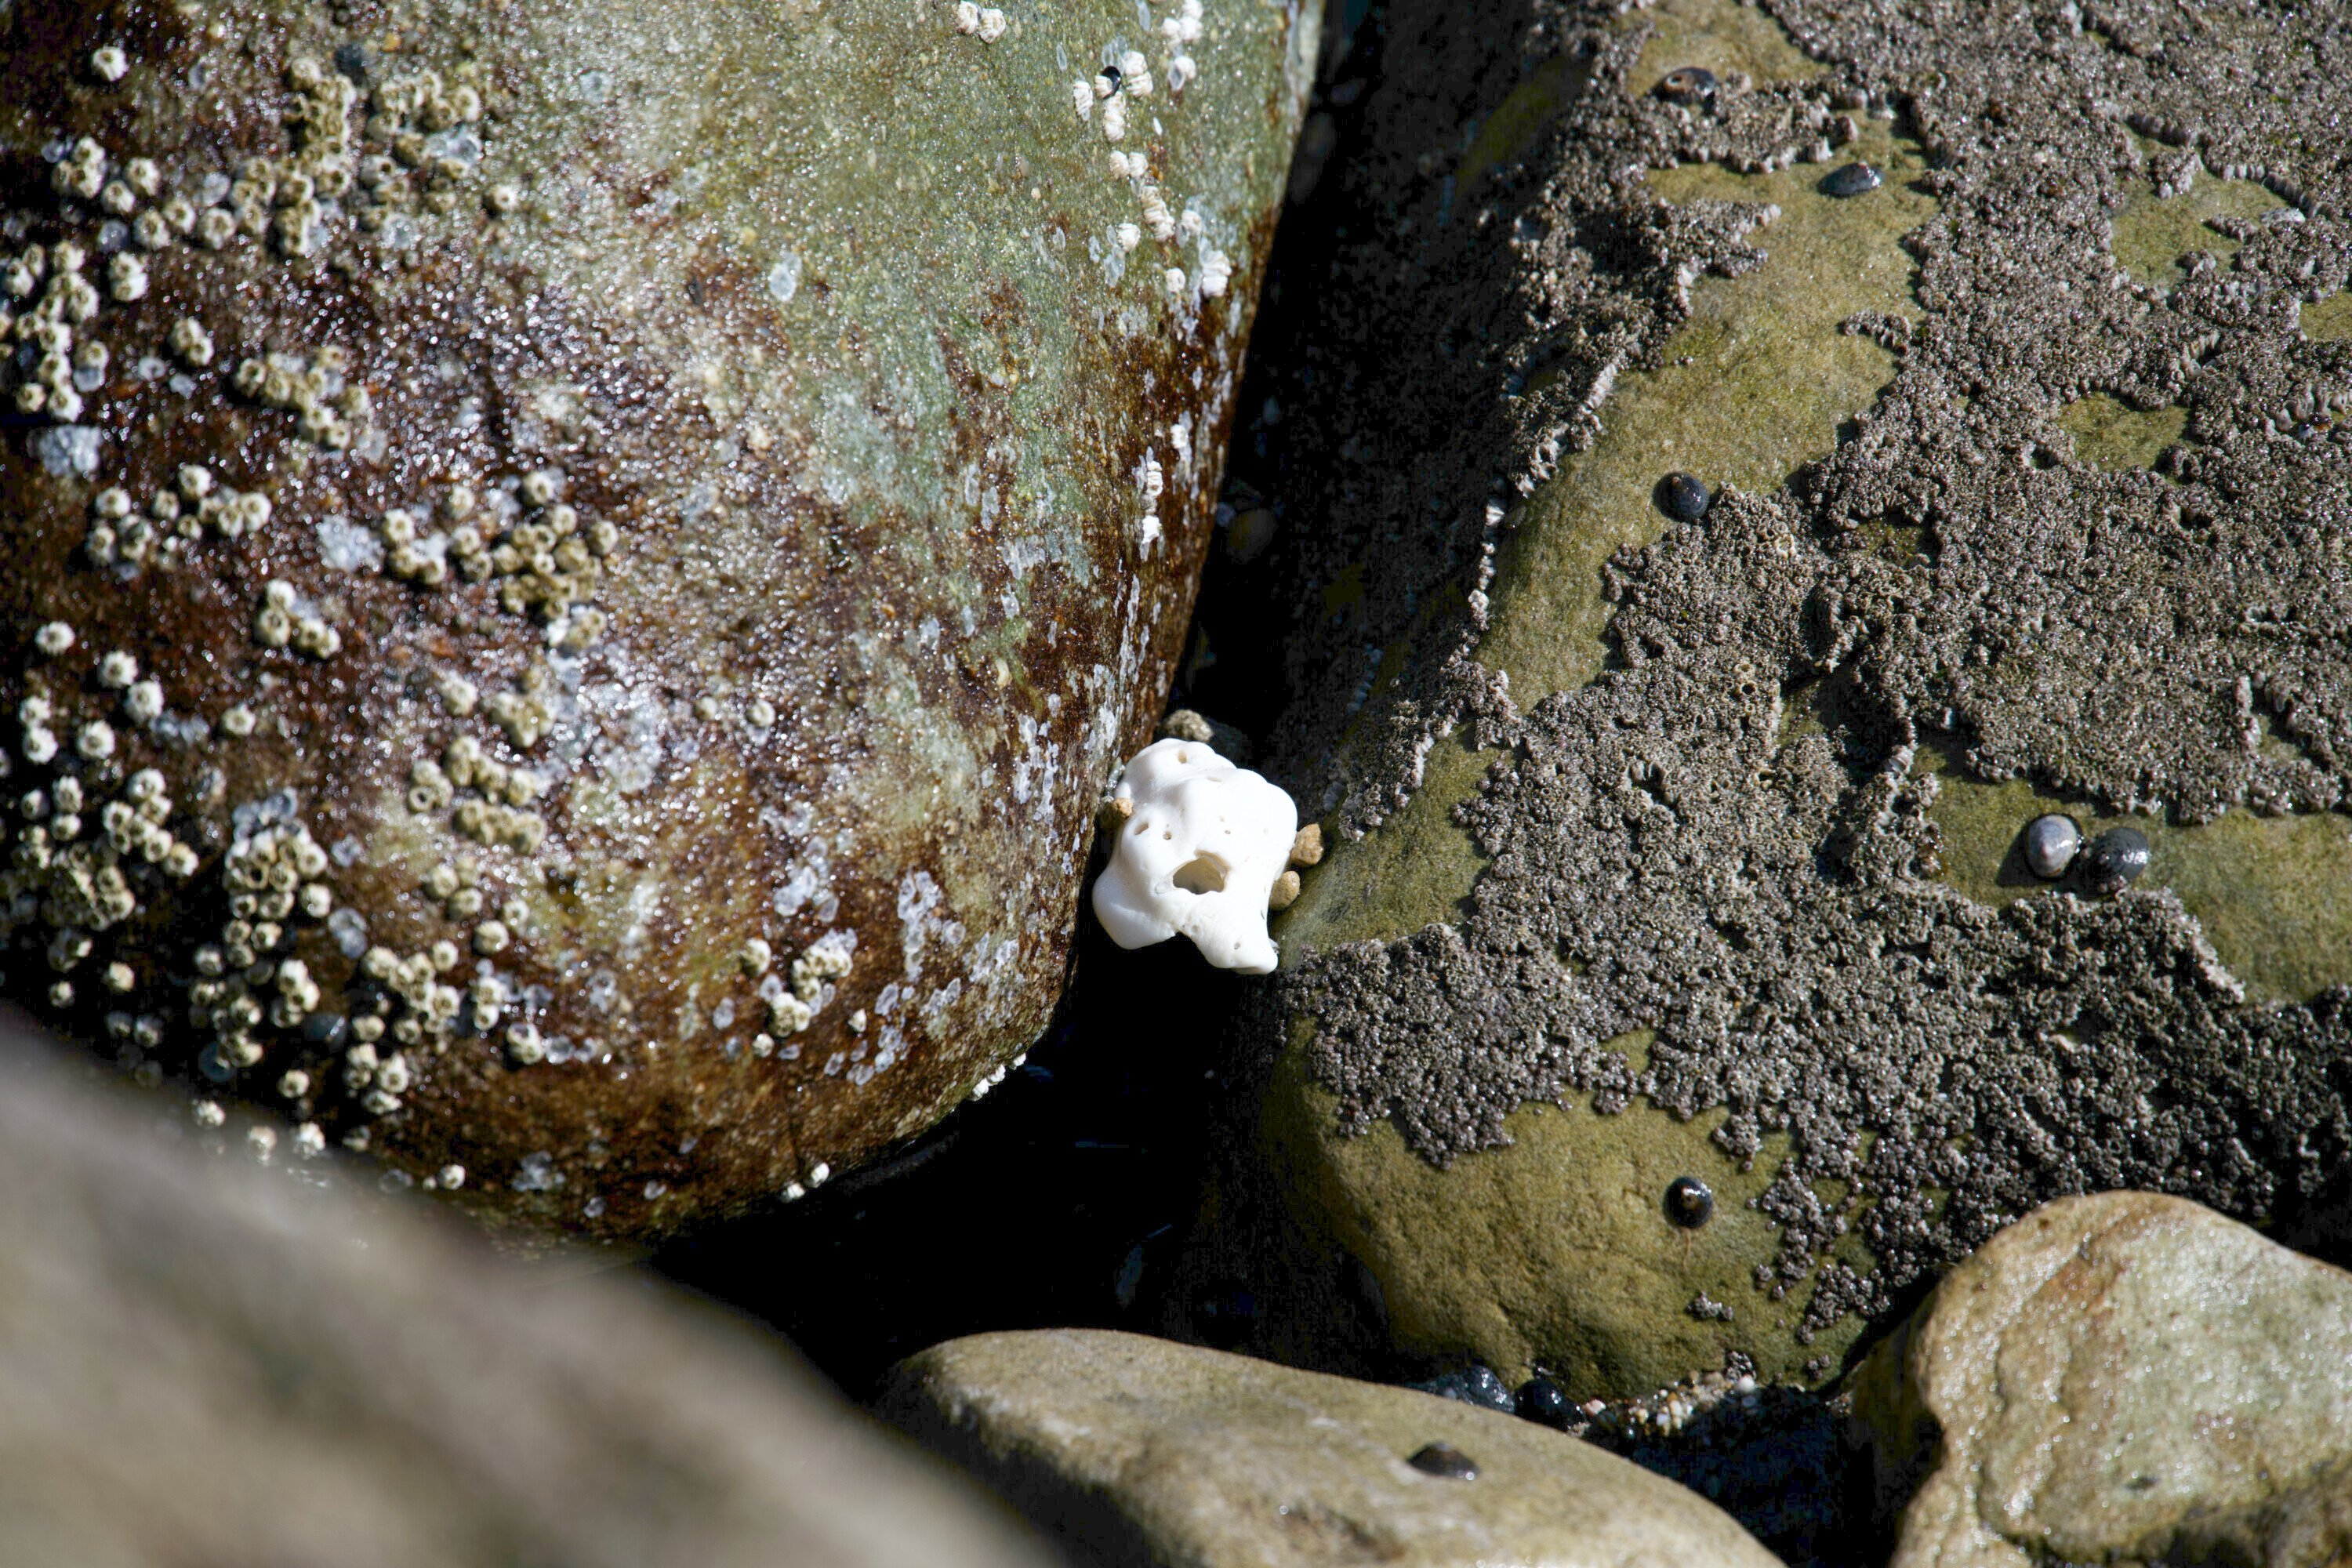 A small white shell nestled between rocks on Malibu Beach, with barnacles visible on the wet stones.